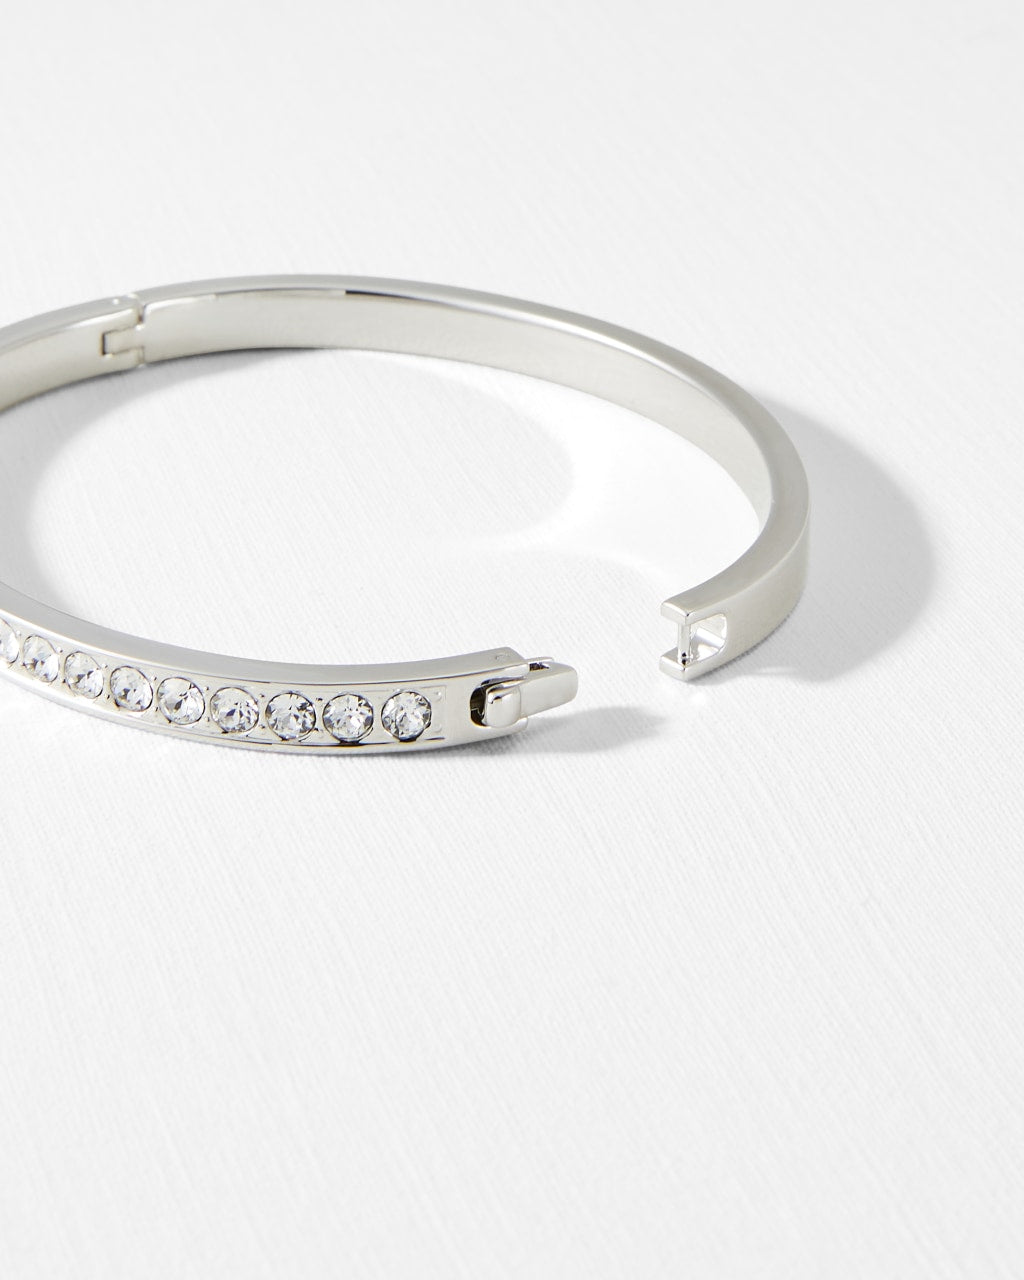 Clemara Hinge Crystal Bangle | eightywingold - official partner of Ted Baker